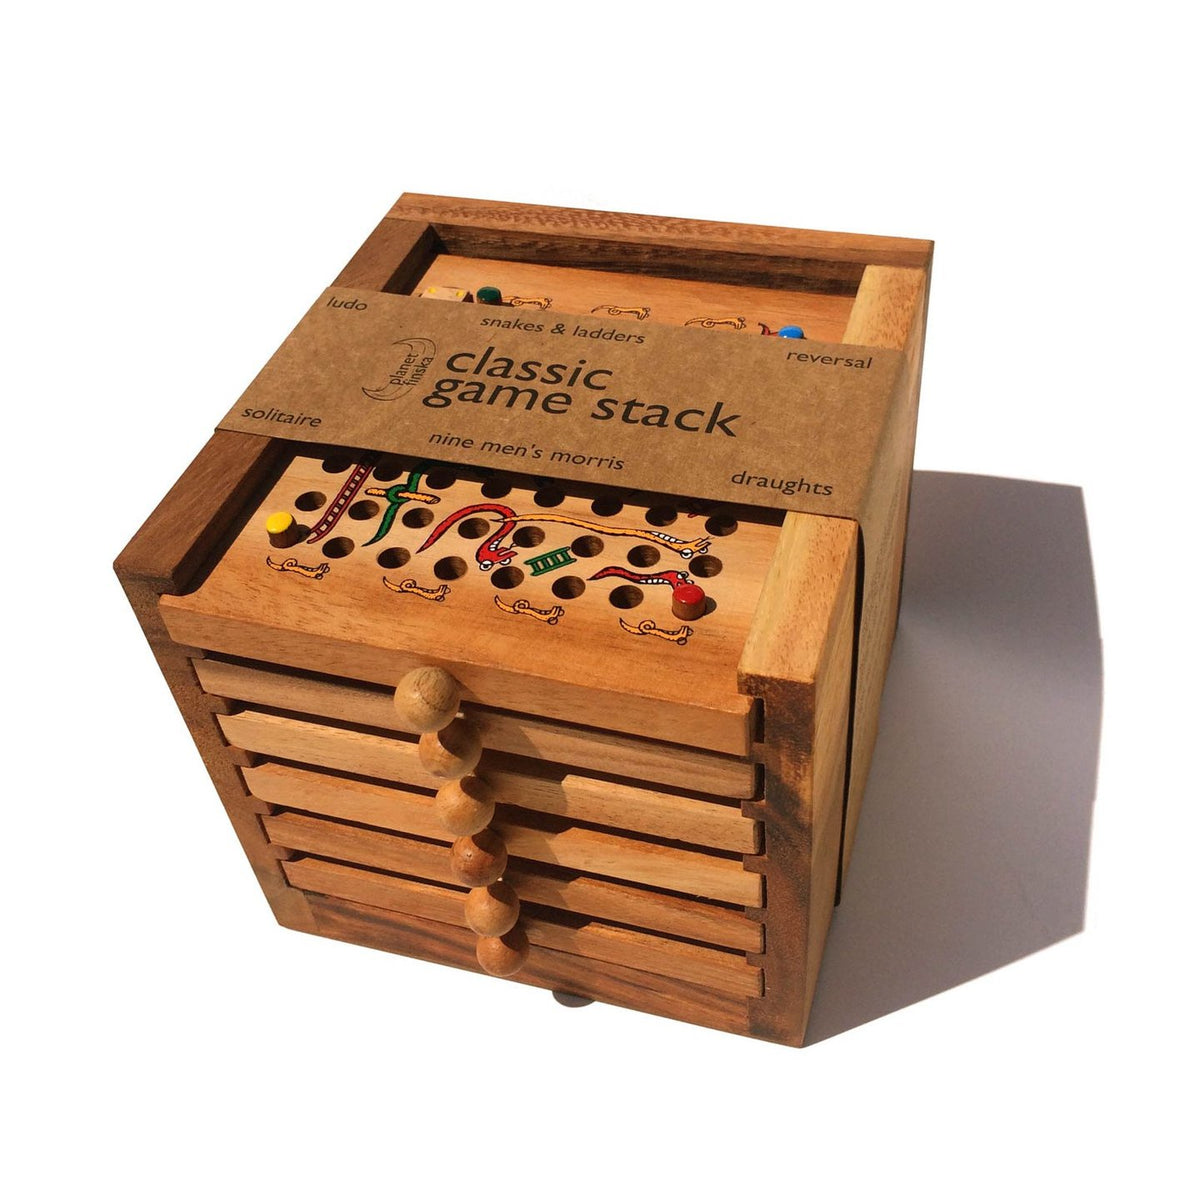 Classic Game Stack 6 Drawers